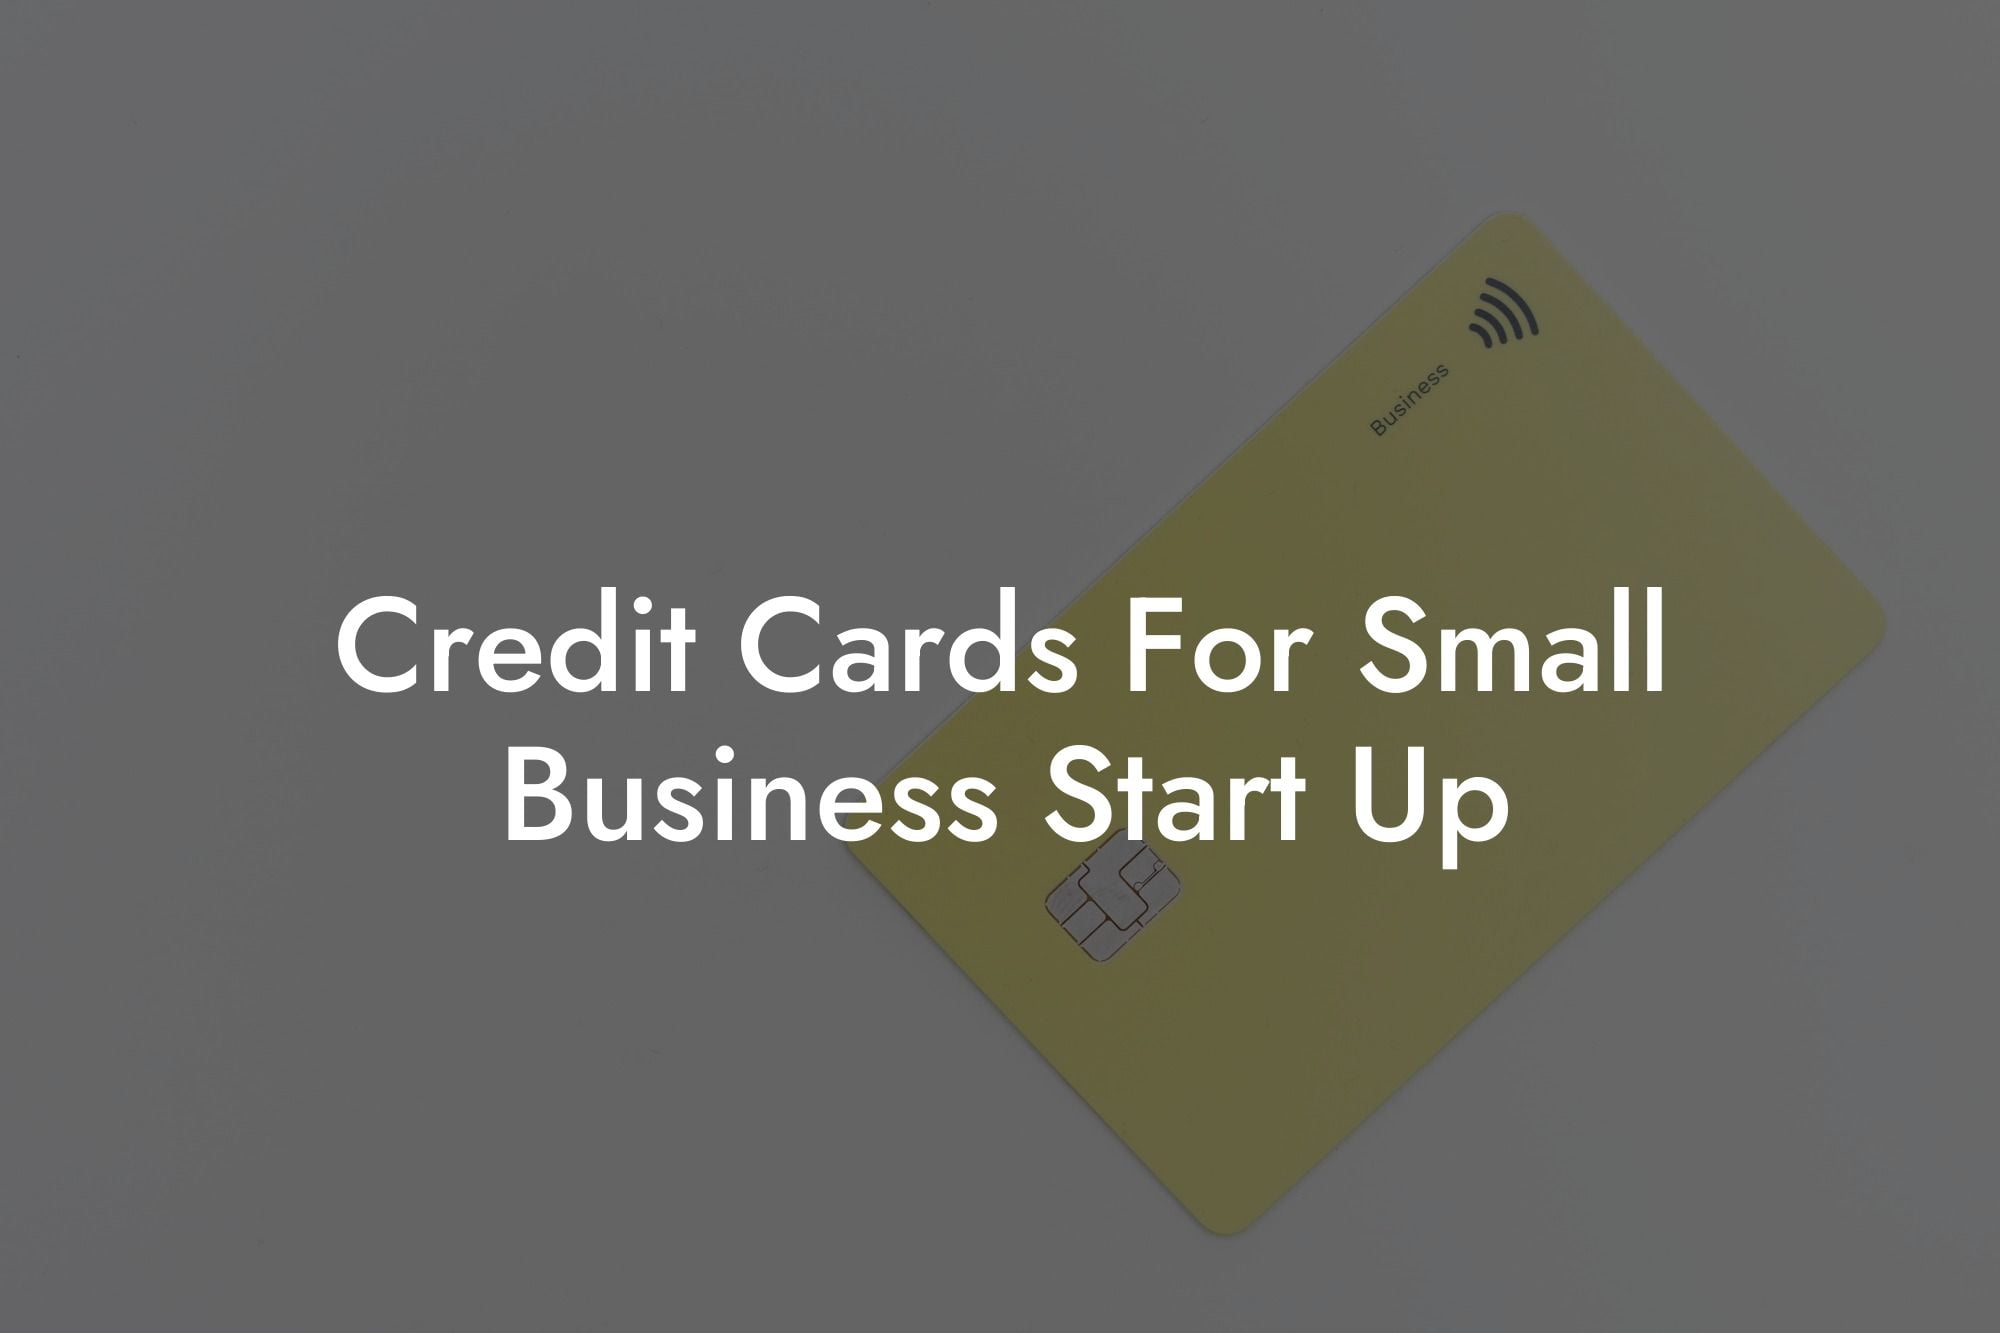 Credit Cards For Small Business Start Up